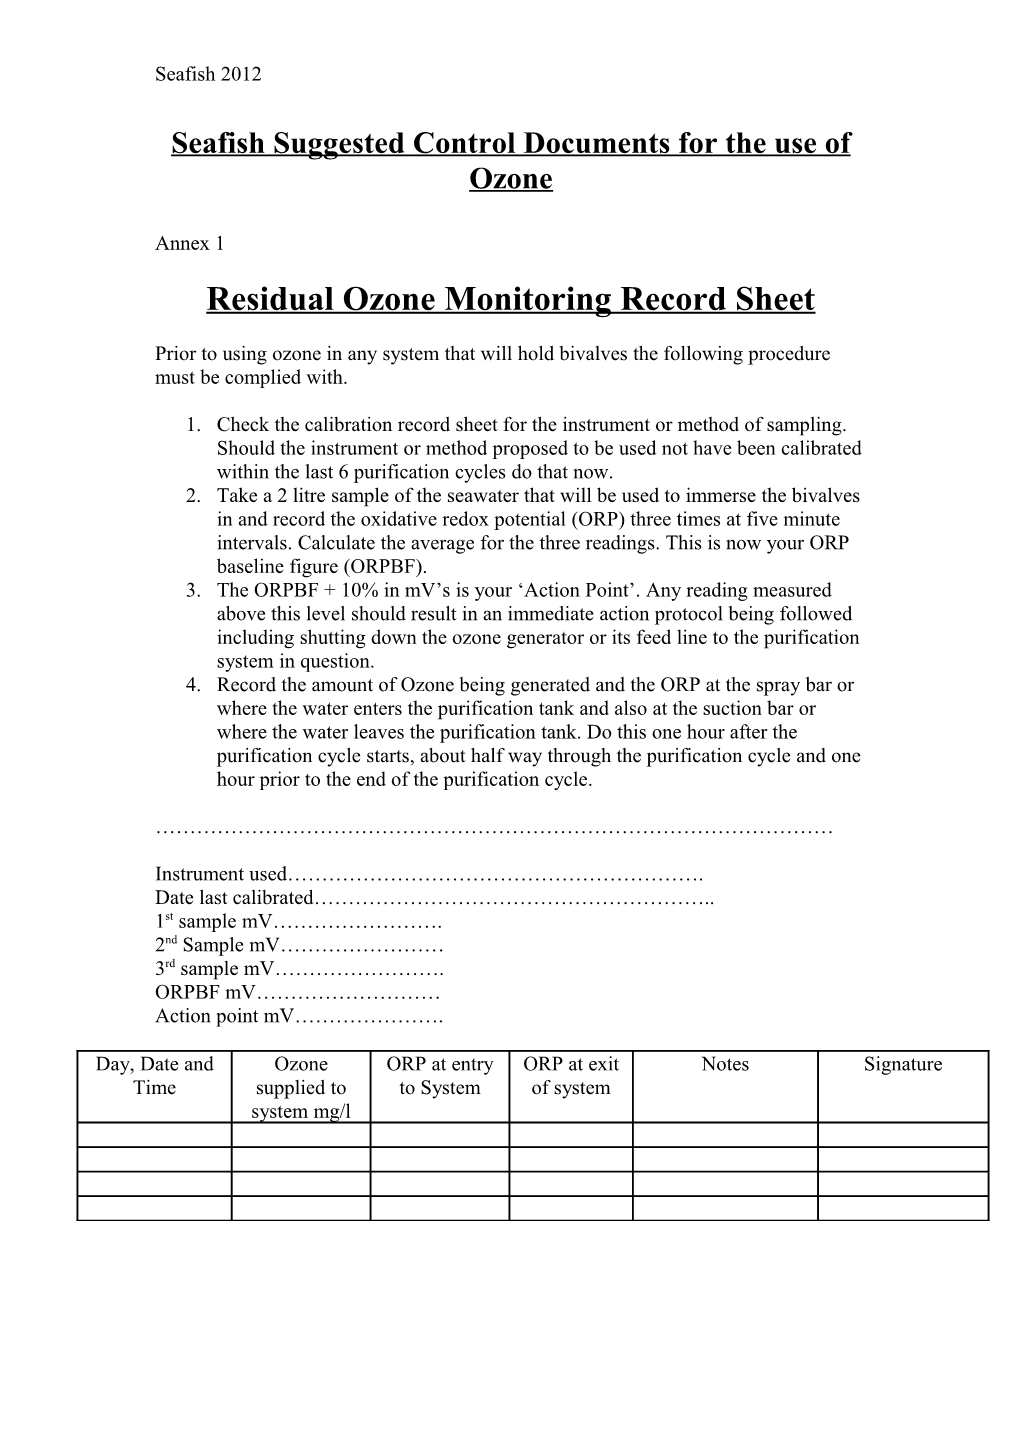 Seafish Suggested Control Documents for the Use of Ozone